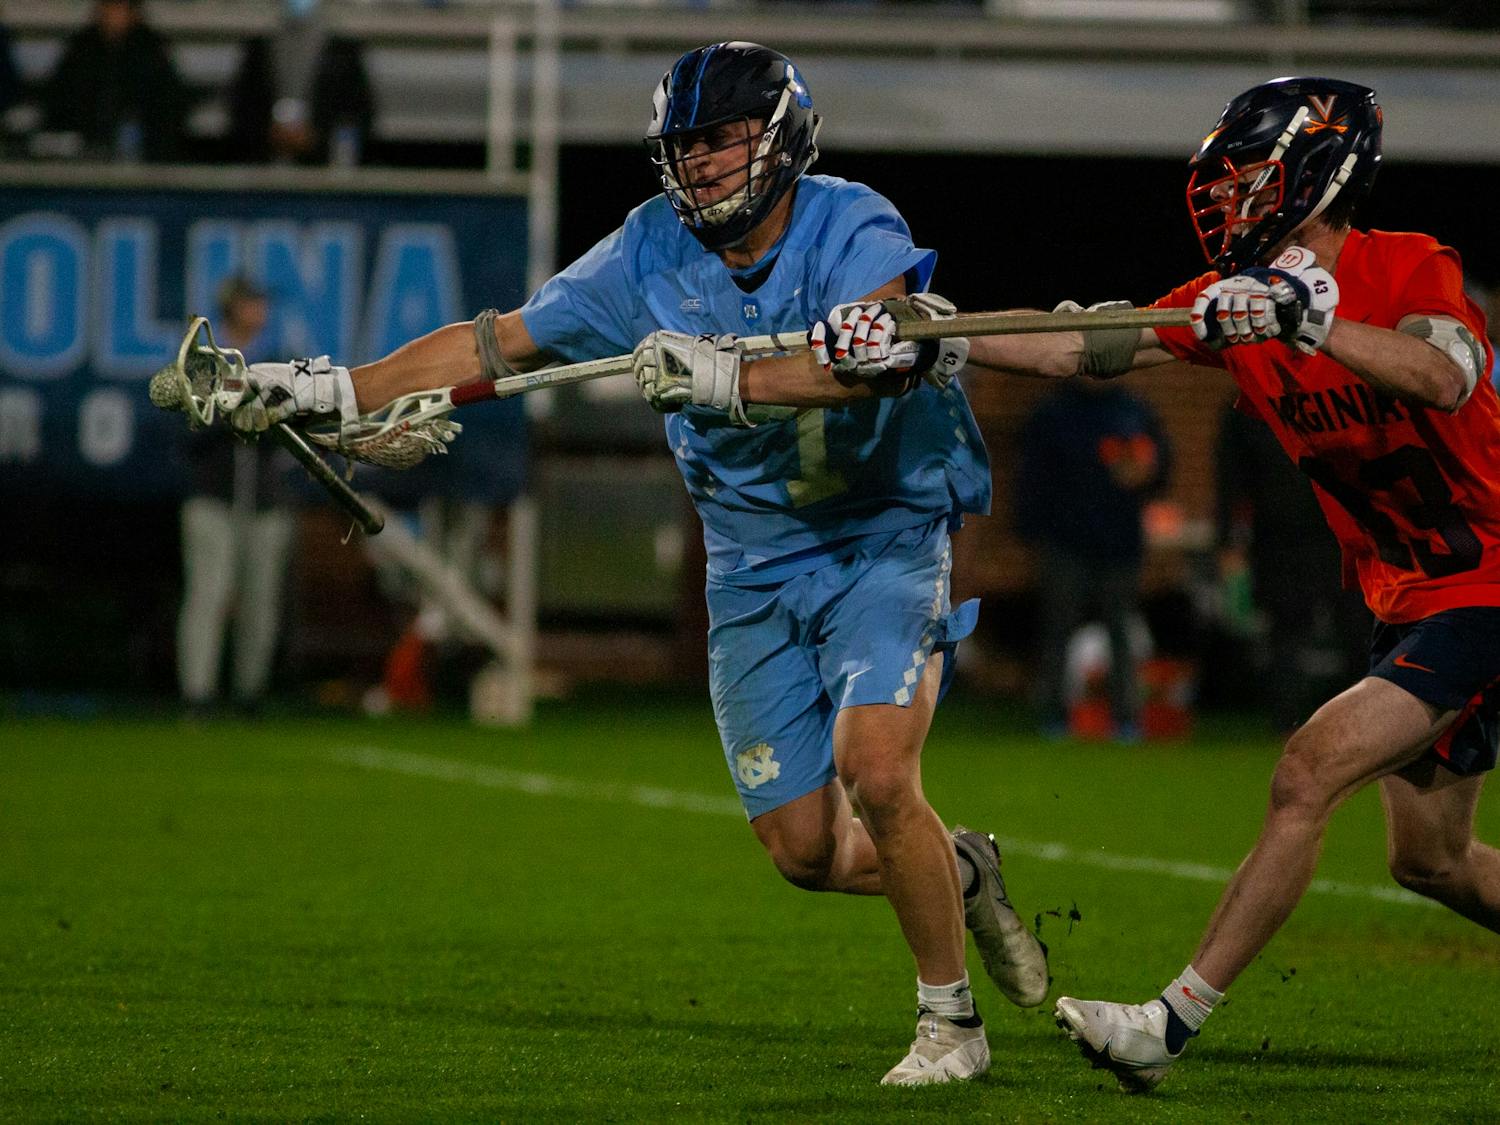 Senior midfielder Zac Tucci (7) protects the ball during the Tar Heels' 15-11 loss against UVA on Thursday, Feb. 11, 2022 on Dorrance Field in Chapel Hill, N.C. Tucci finished the night with 7 ground balls and two shots, one on goal.